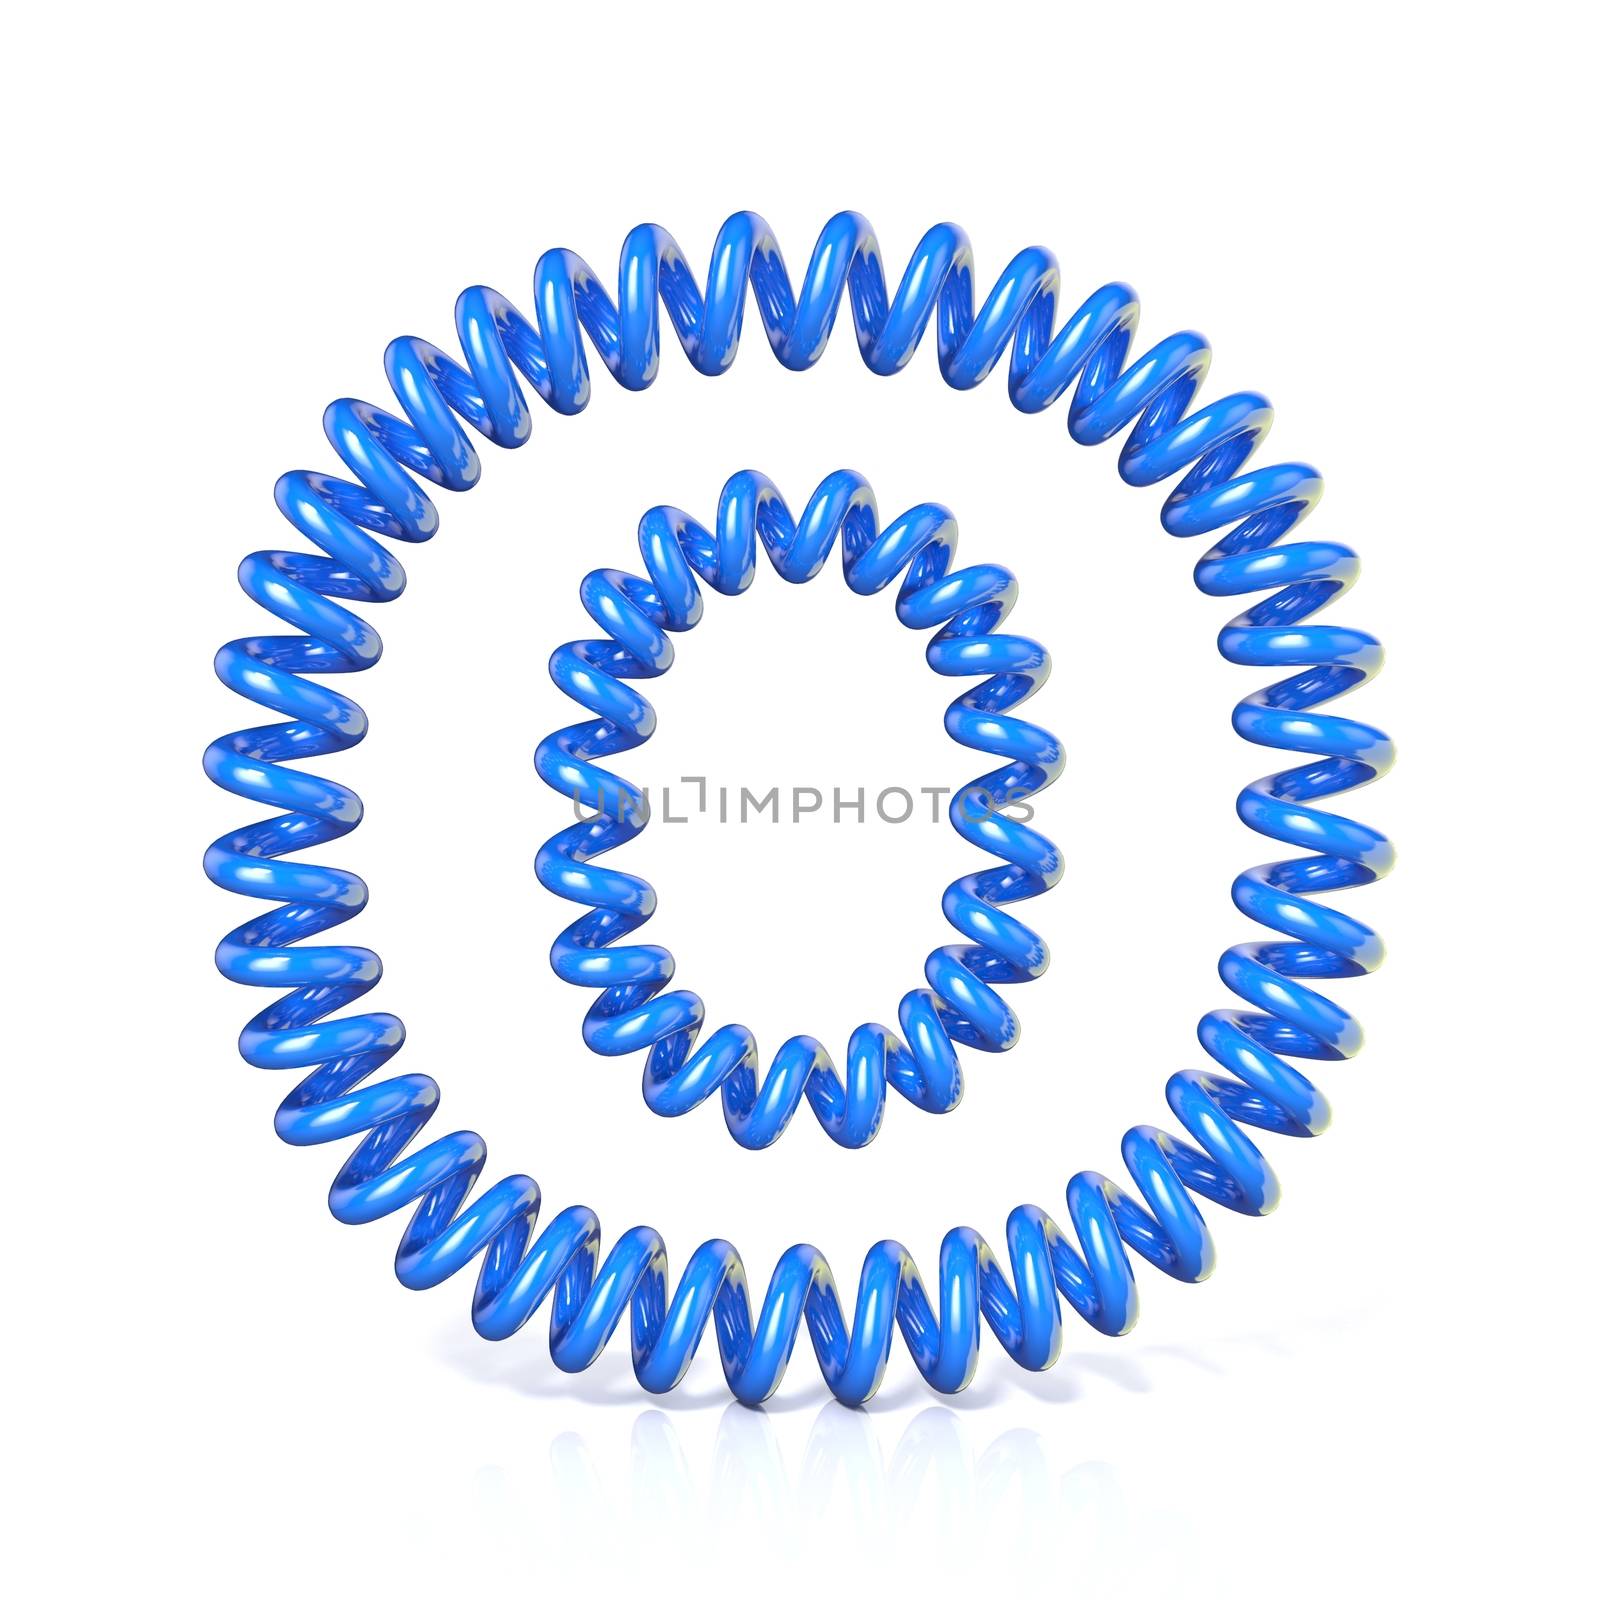 Spring, spiral cable font collection letter - O. 3D render illustration, isolated on white background